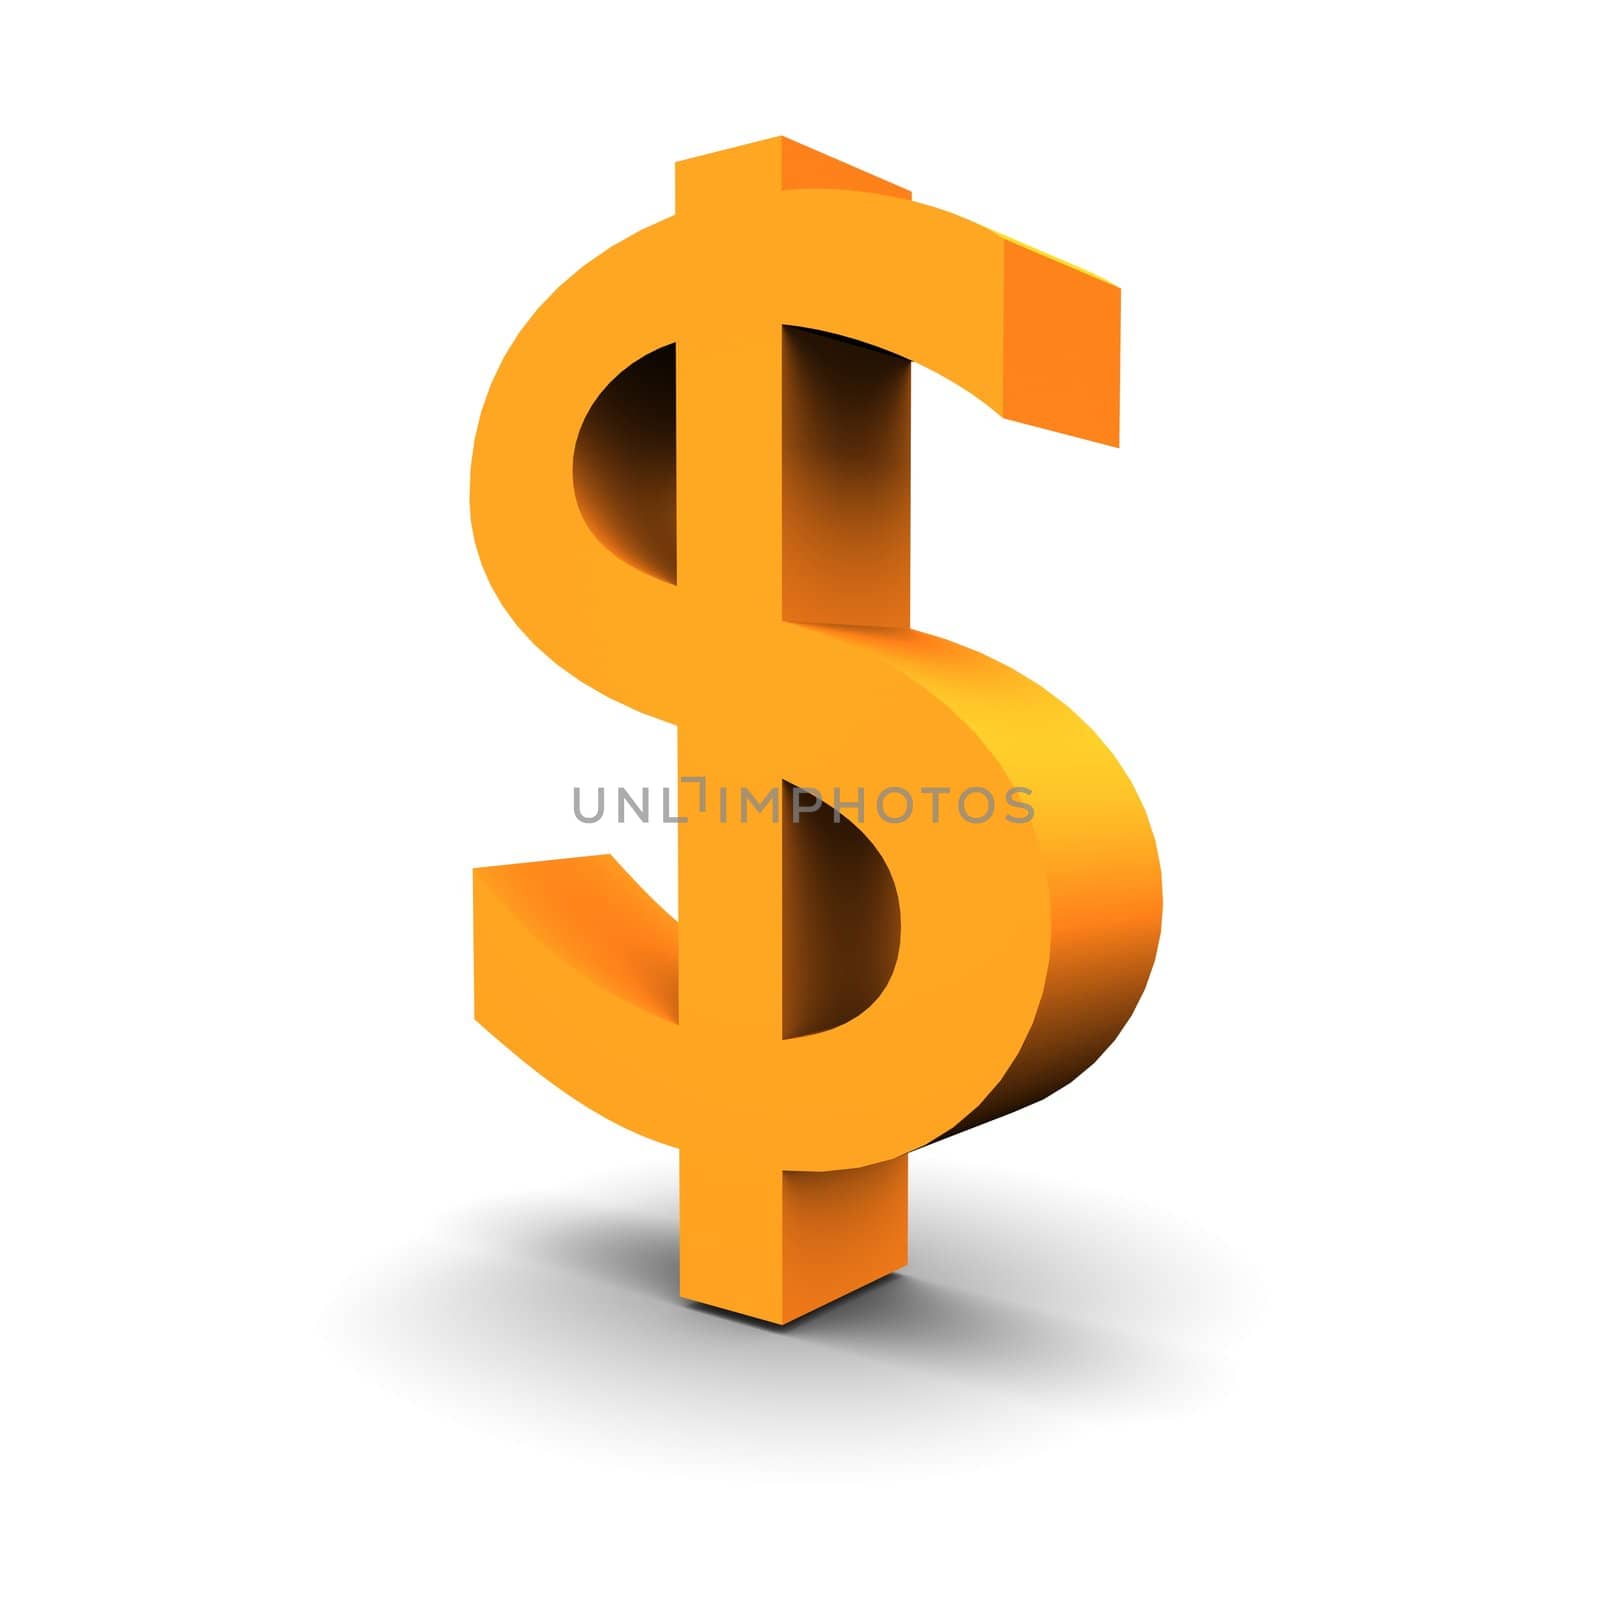 Dollar symbol 3d rendered image by skvoor